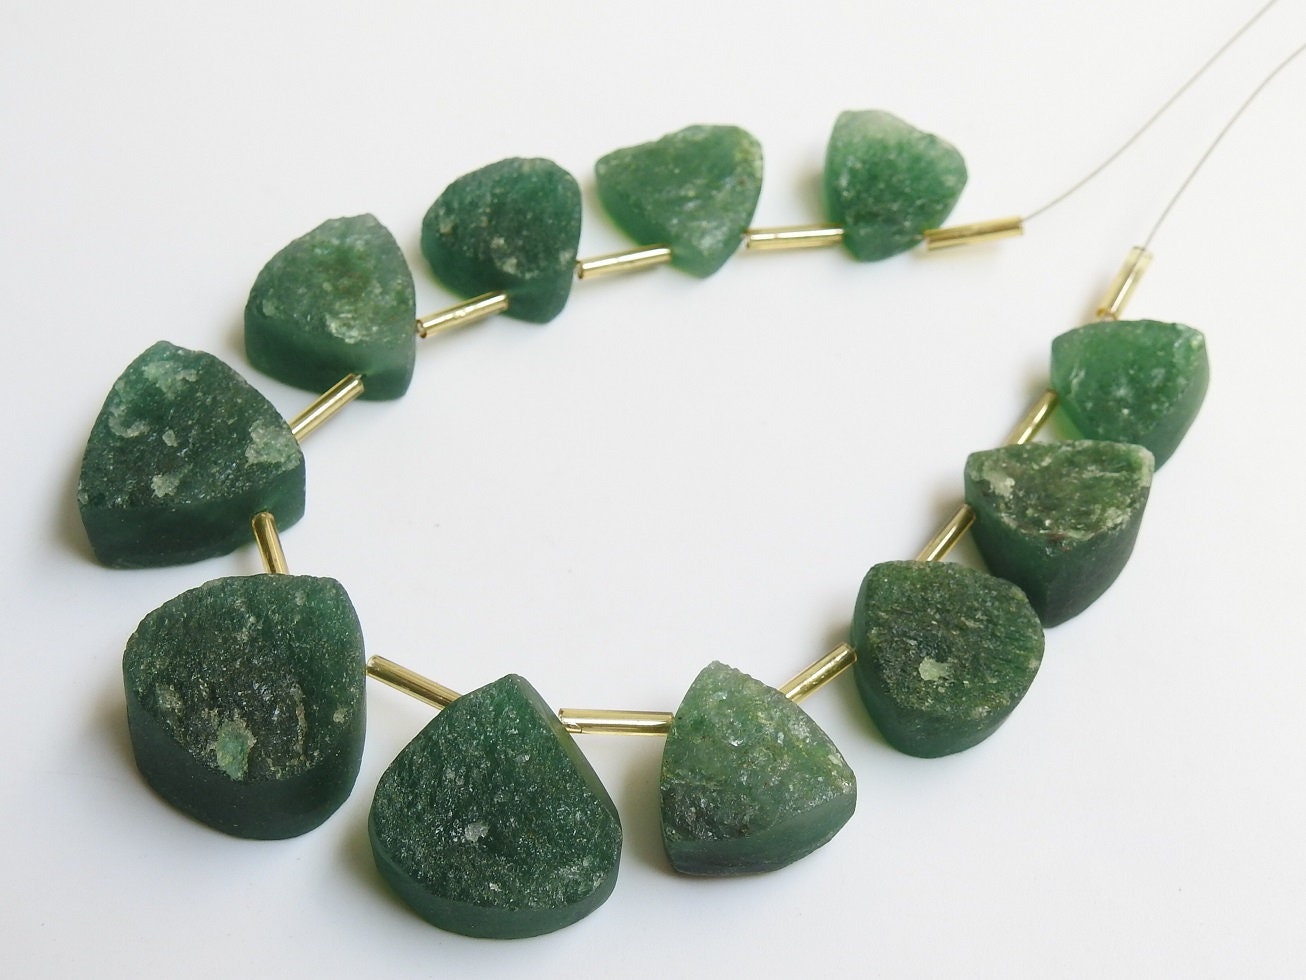 Natural Green Aventurine Druzy,Loose Rough,Raw Stone,Triangle Shape,11Piece Strand 20X20To13X13 MM Approx,Wholesaler,Supplies PME-R6 | Save 33% - Rajasthan Living 15